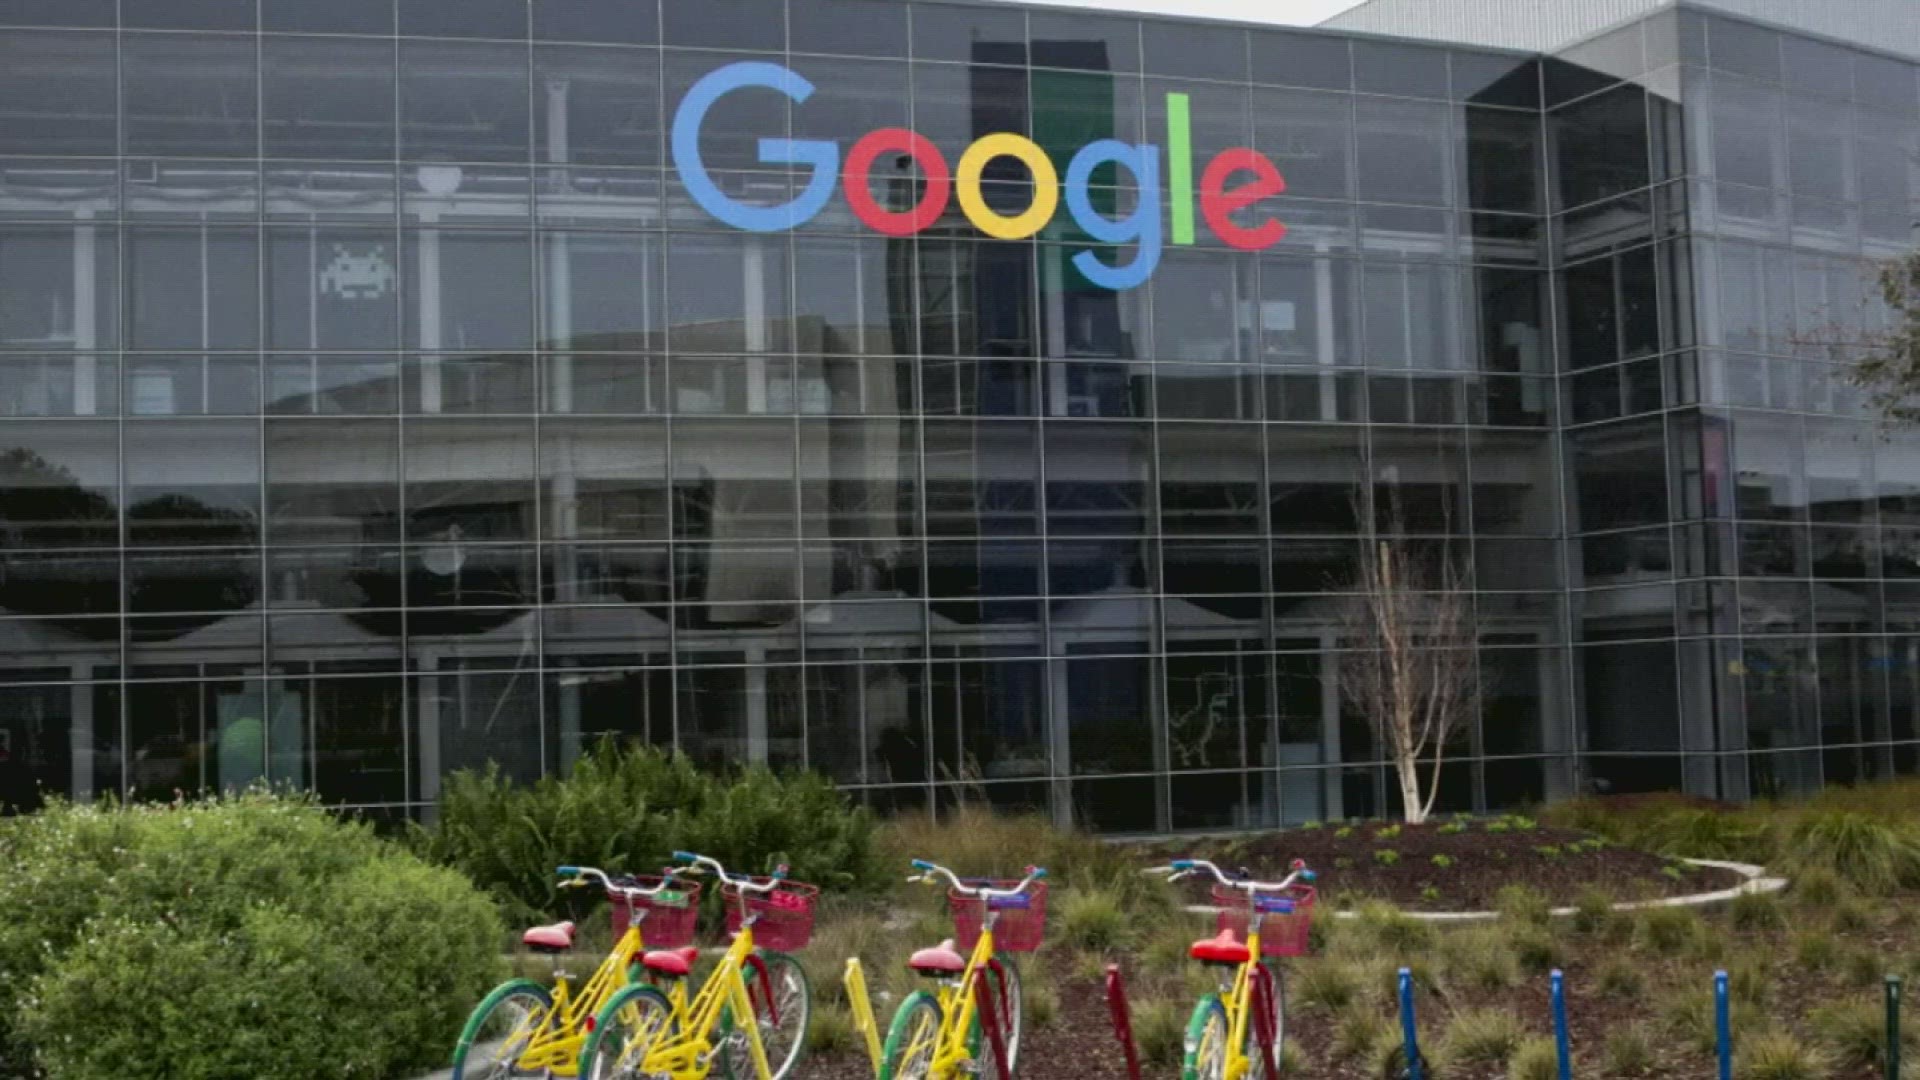 Google is accused of making exclusive deals with phone companies to make its search engine the default for customers.